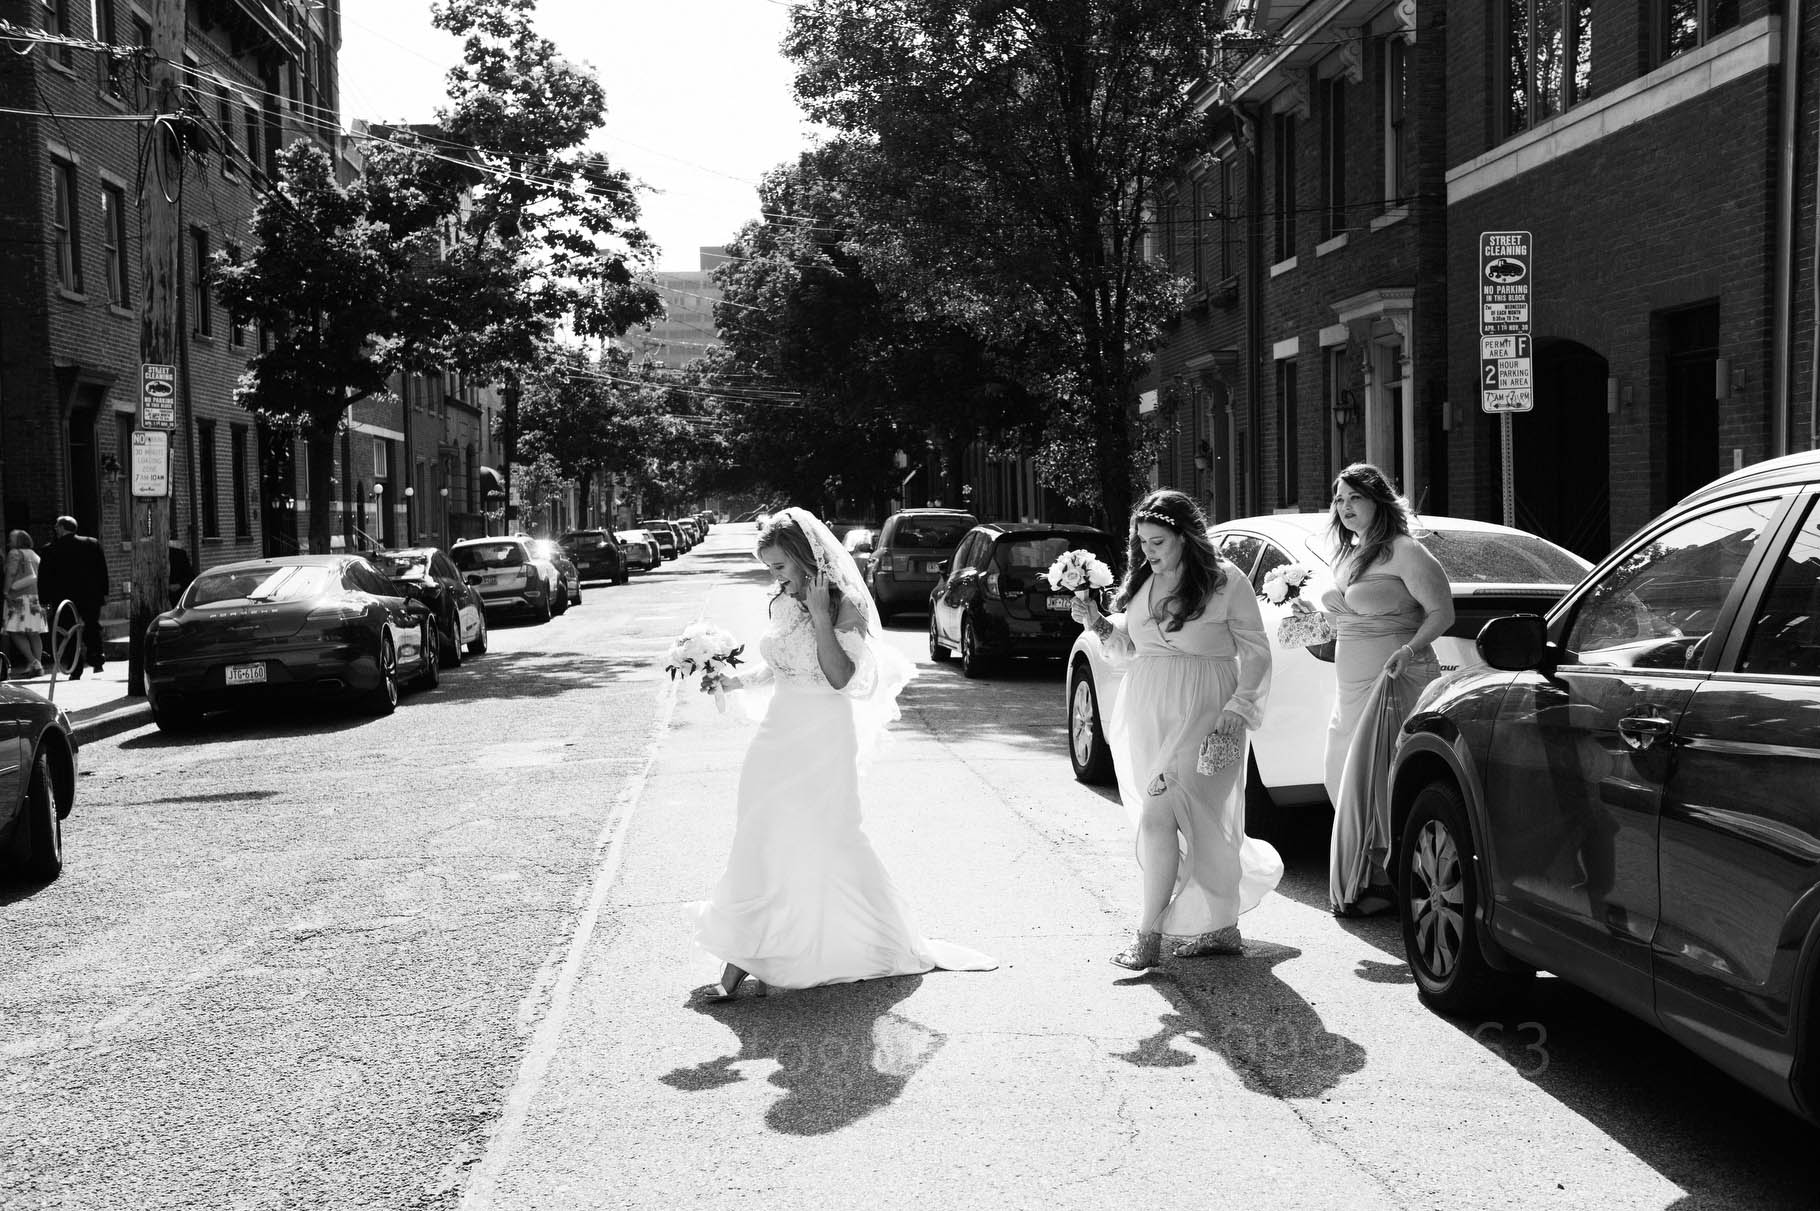 A bride steps across a city street filled with row houses as she makes her way to the wedding venue.